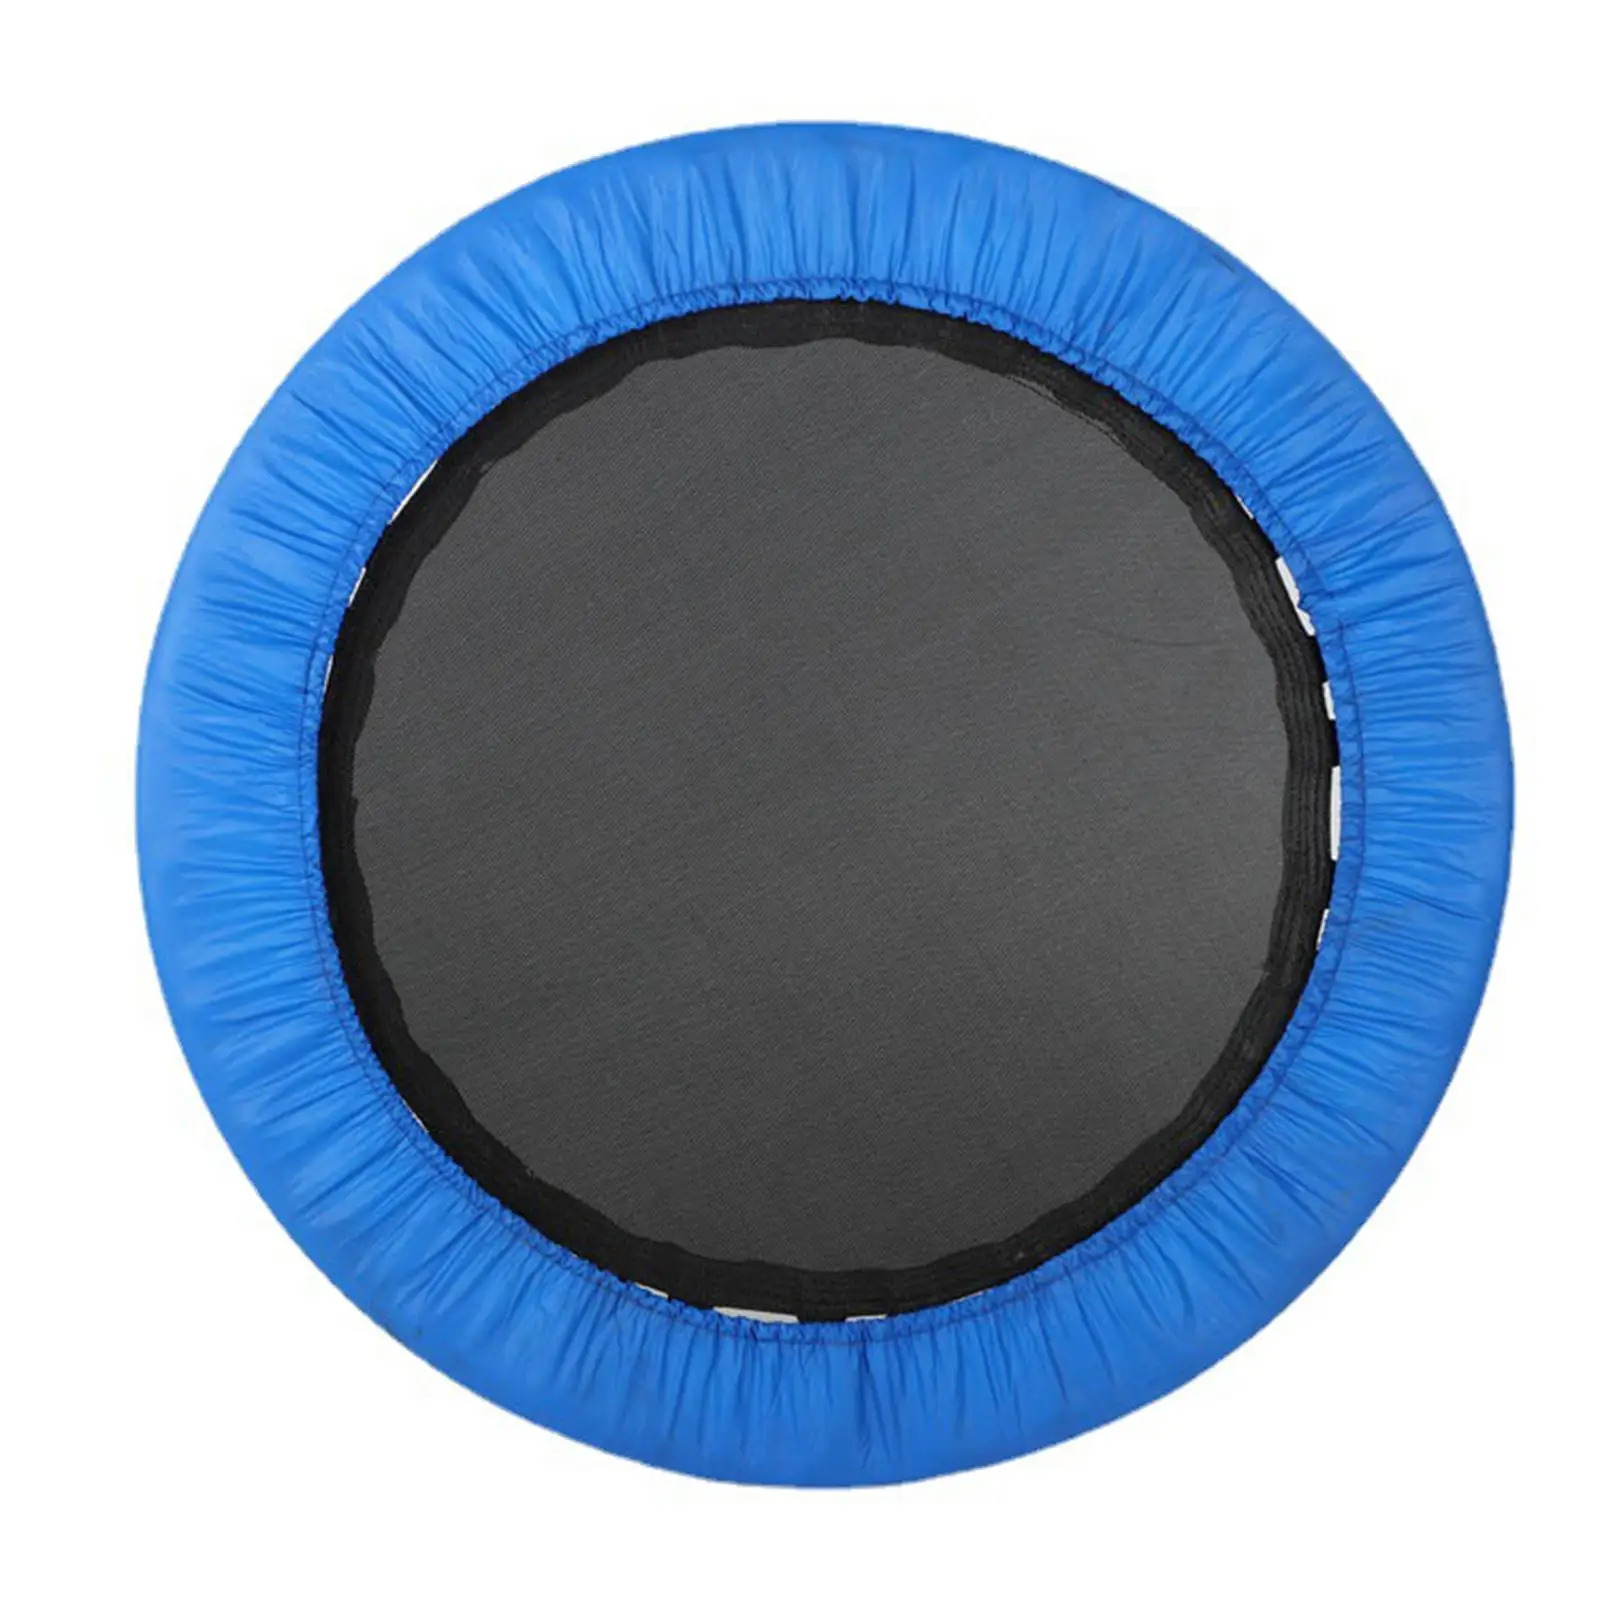 Trampoline Mat Jumping Mat Trampoline Mesh Mat Parts Reusable Durable Pad Round Jumping Pad for Workout Family Gymnastics